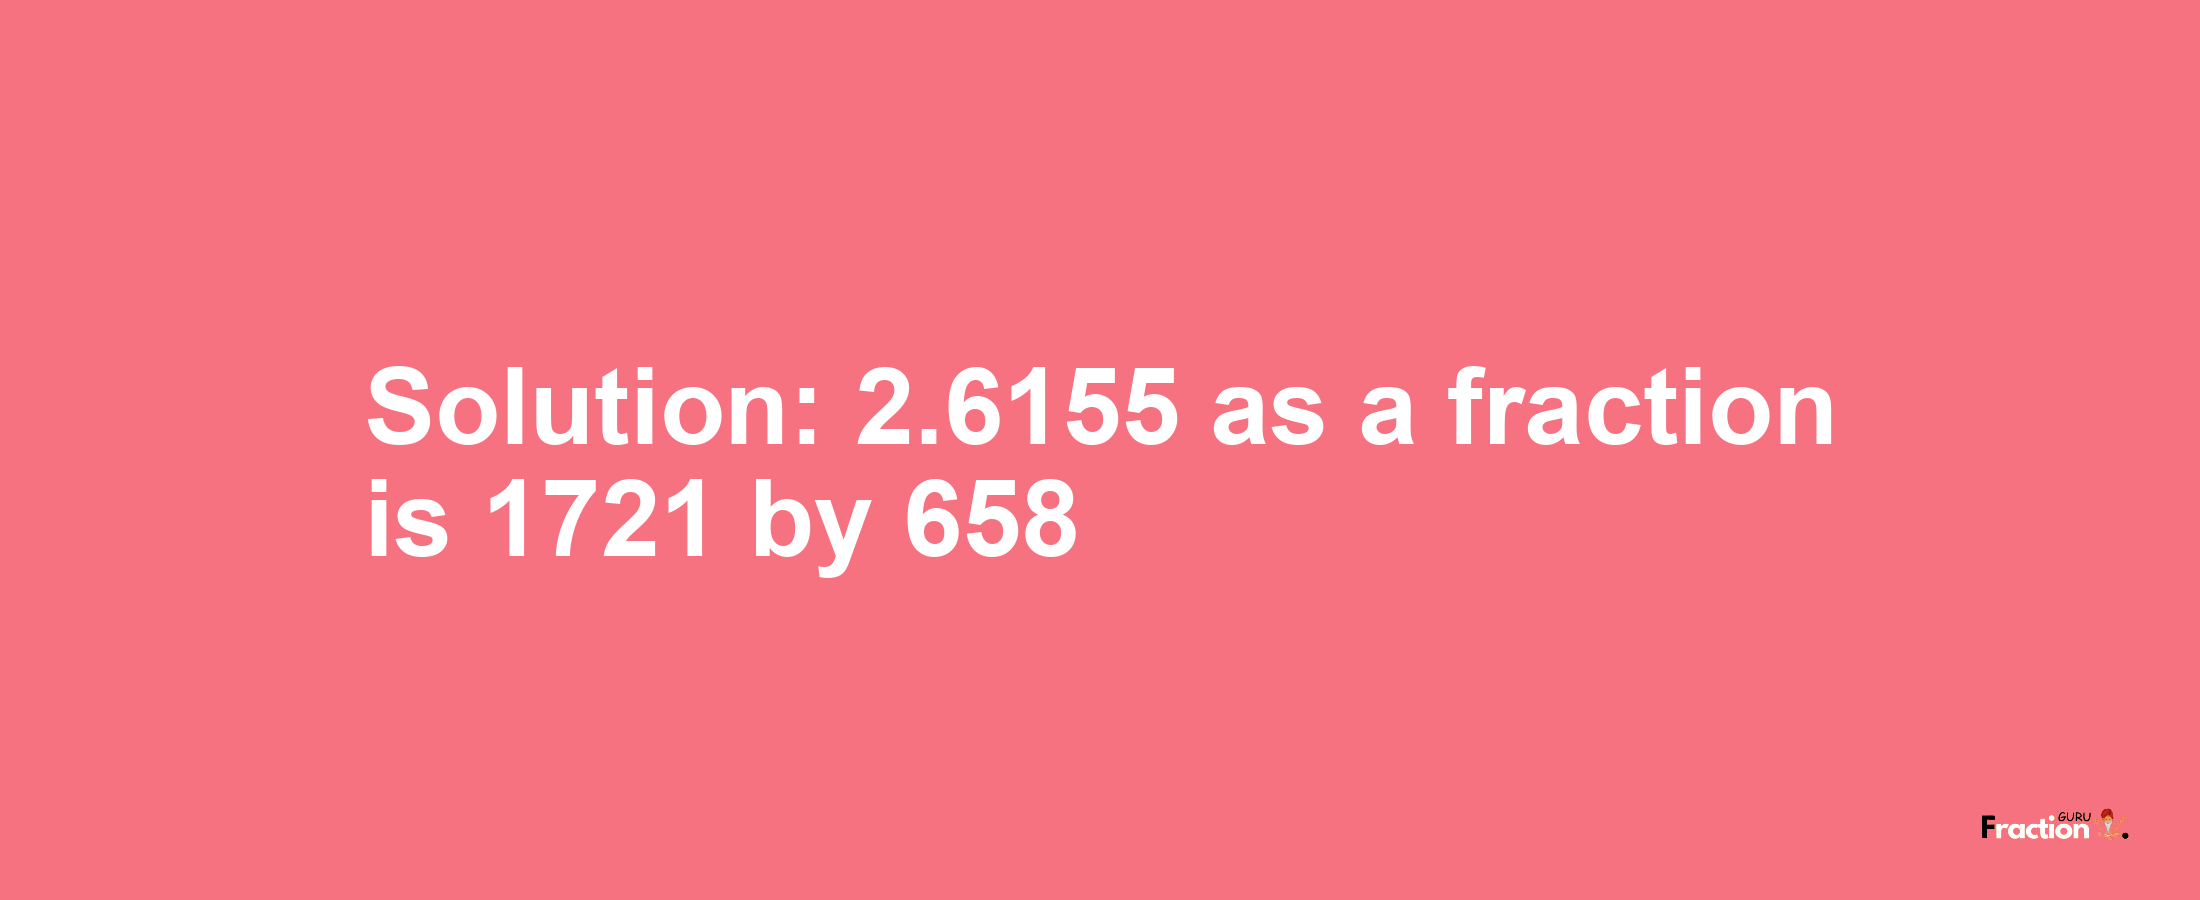 Solution:2.6155 as a fraction is 1721/658